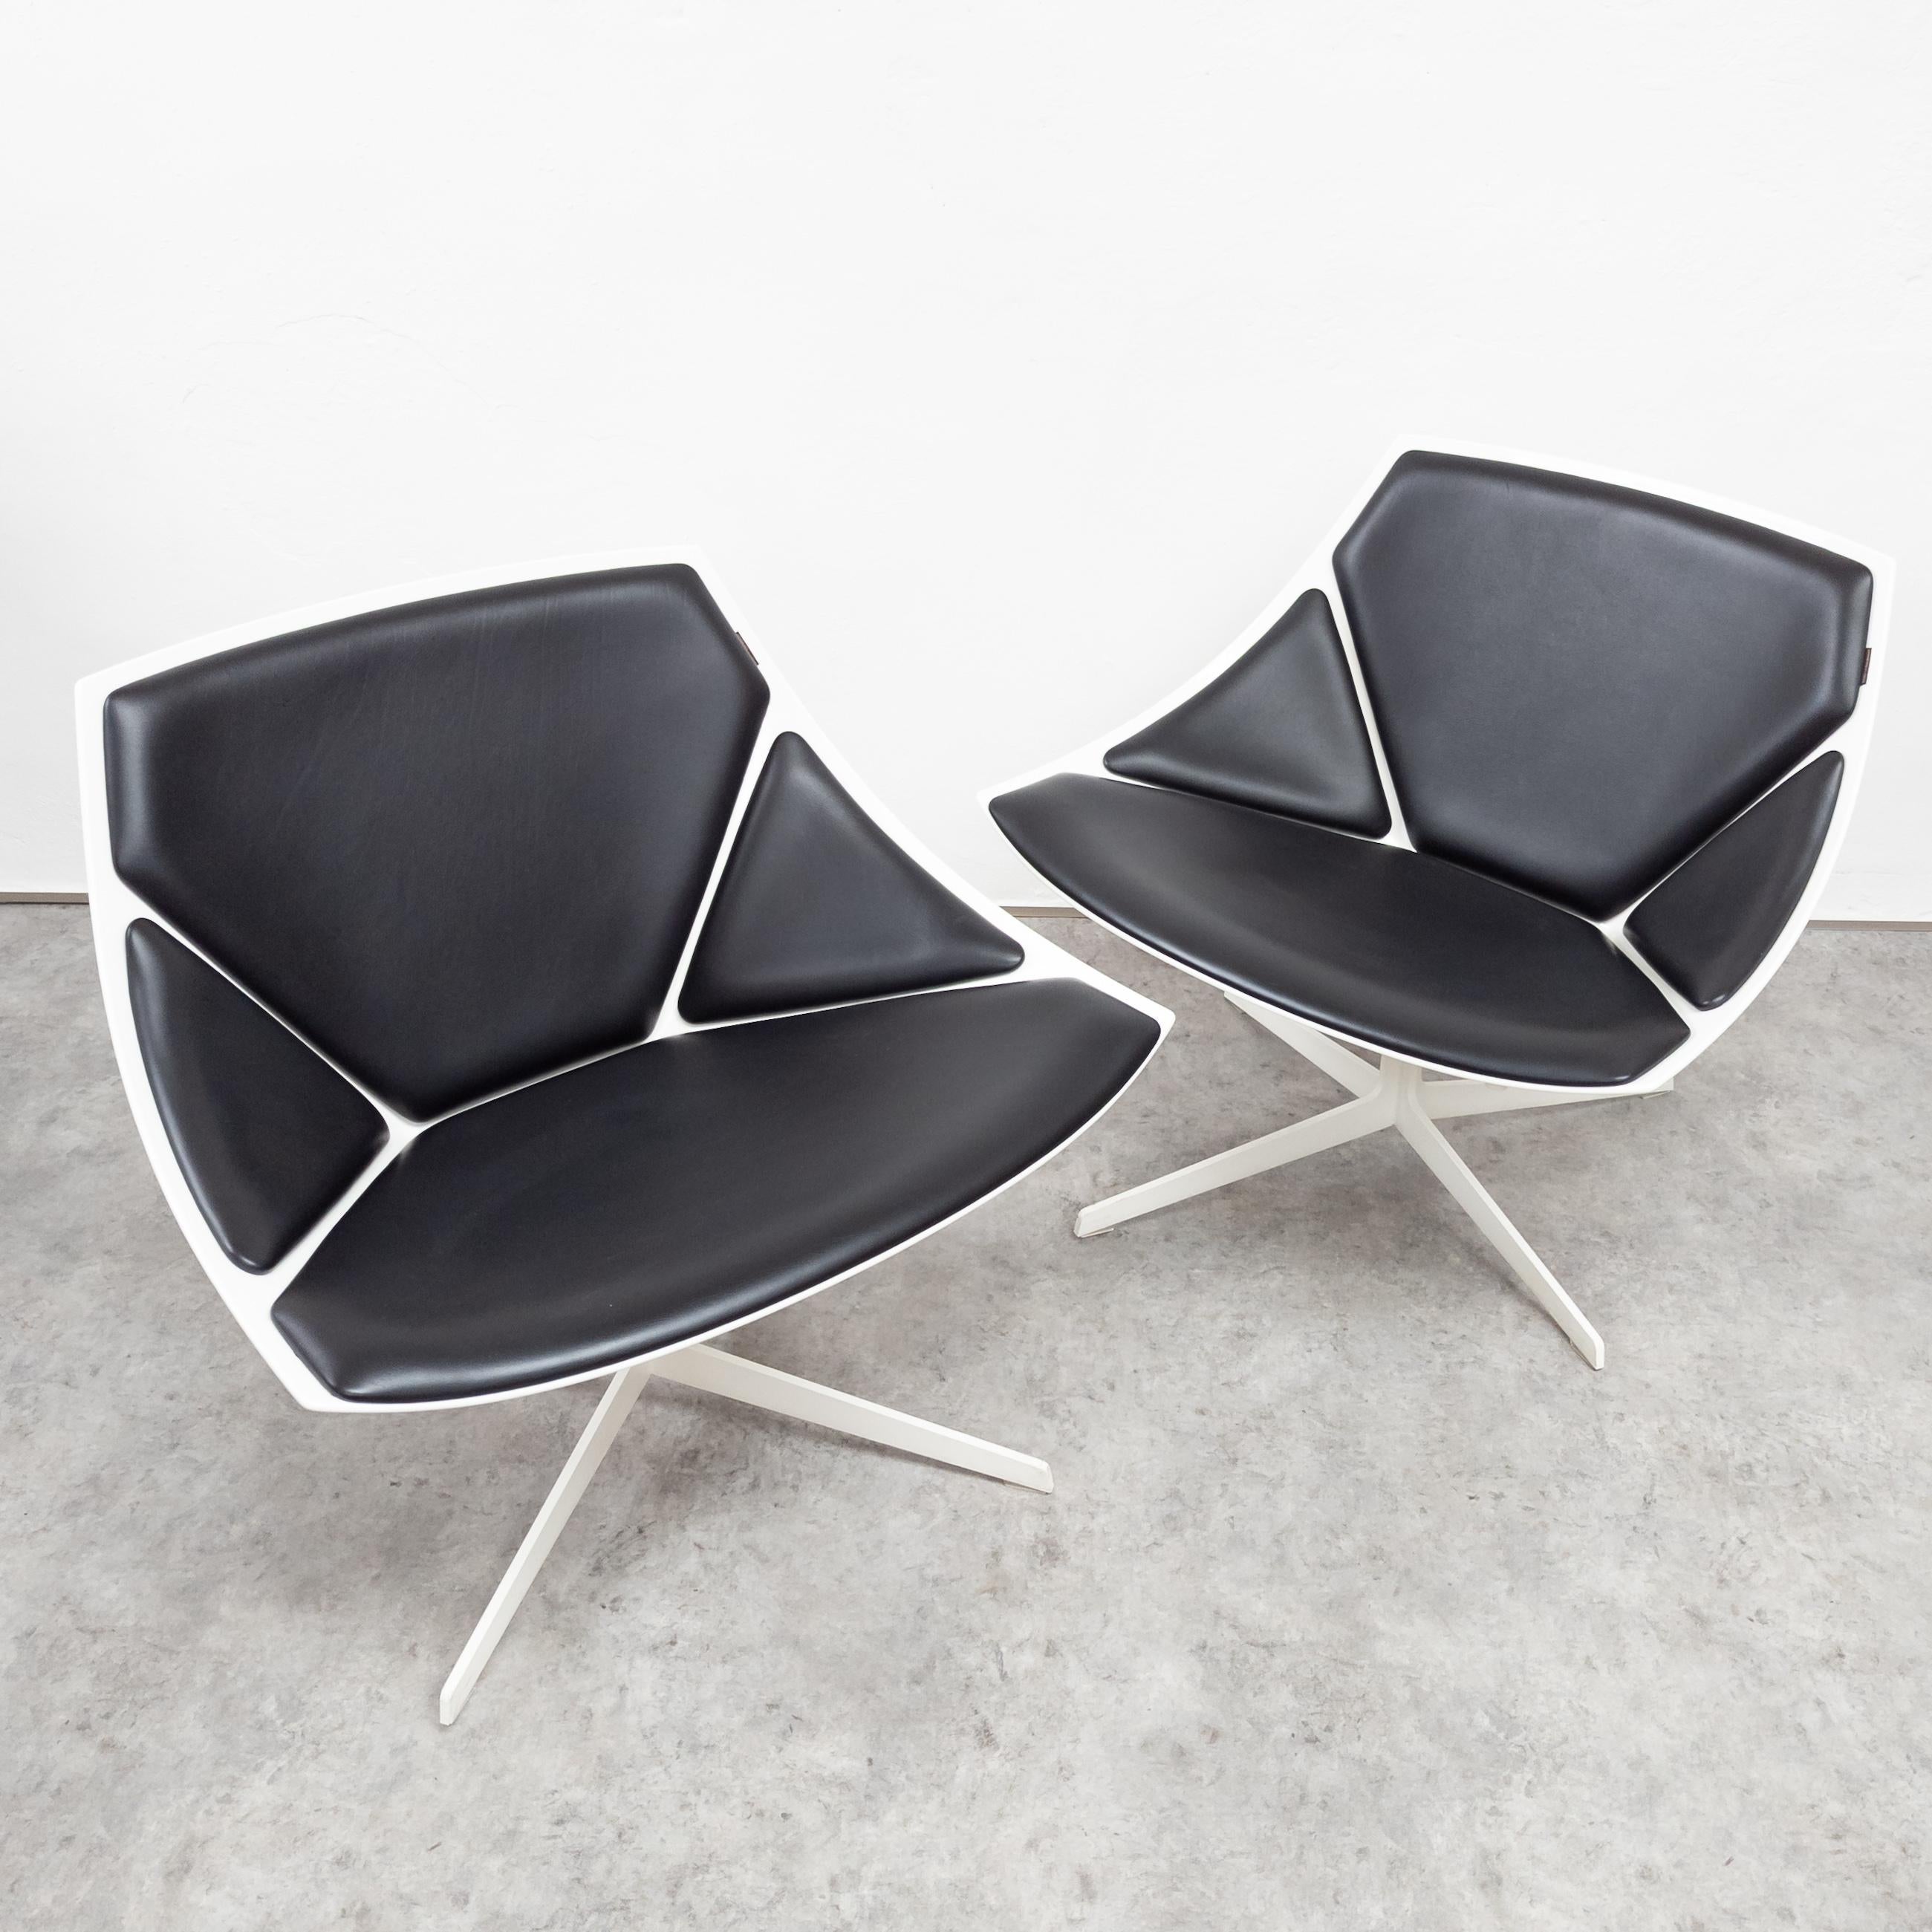 Designed in Space age style in 2007, manufactured by Danish company Republic of Fritz Hansen. Shell is made of injection-molded fiber-reinforced lacquered plastic with leather upholstery. Swivel base is made of lacquered steel with transparent leg